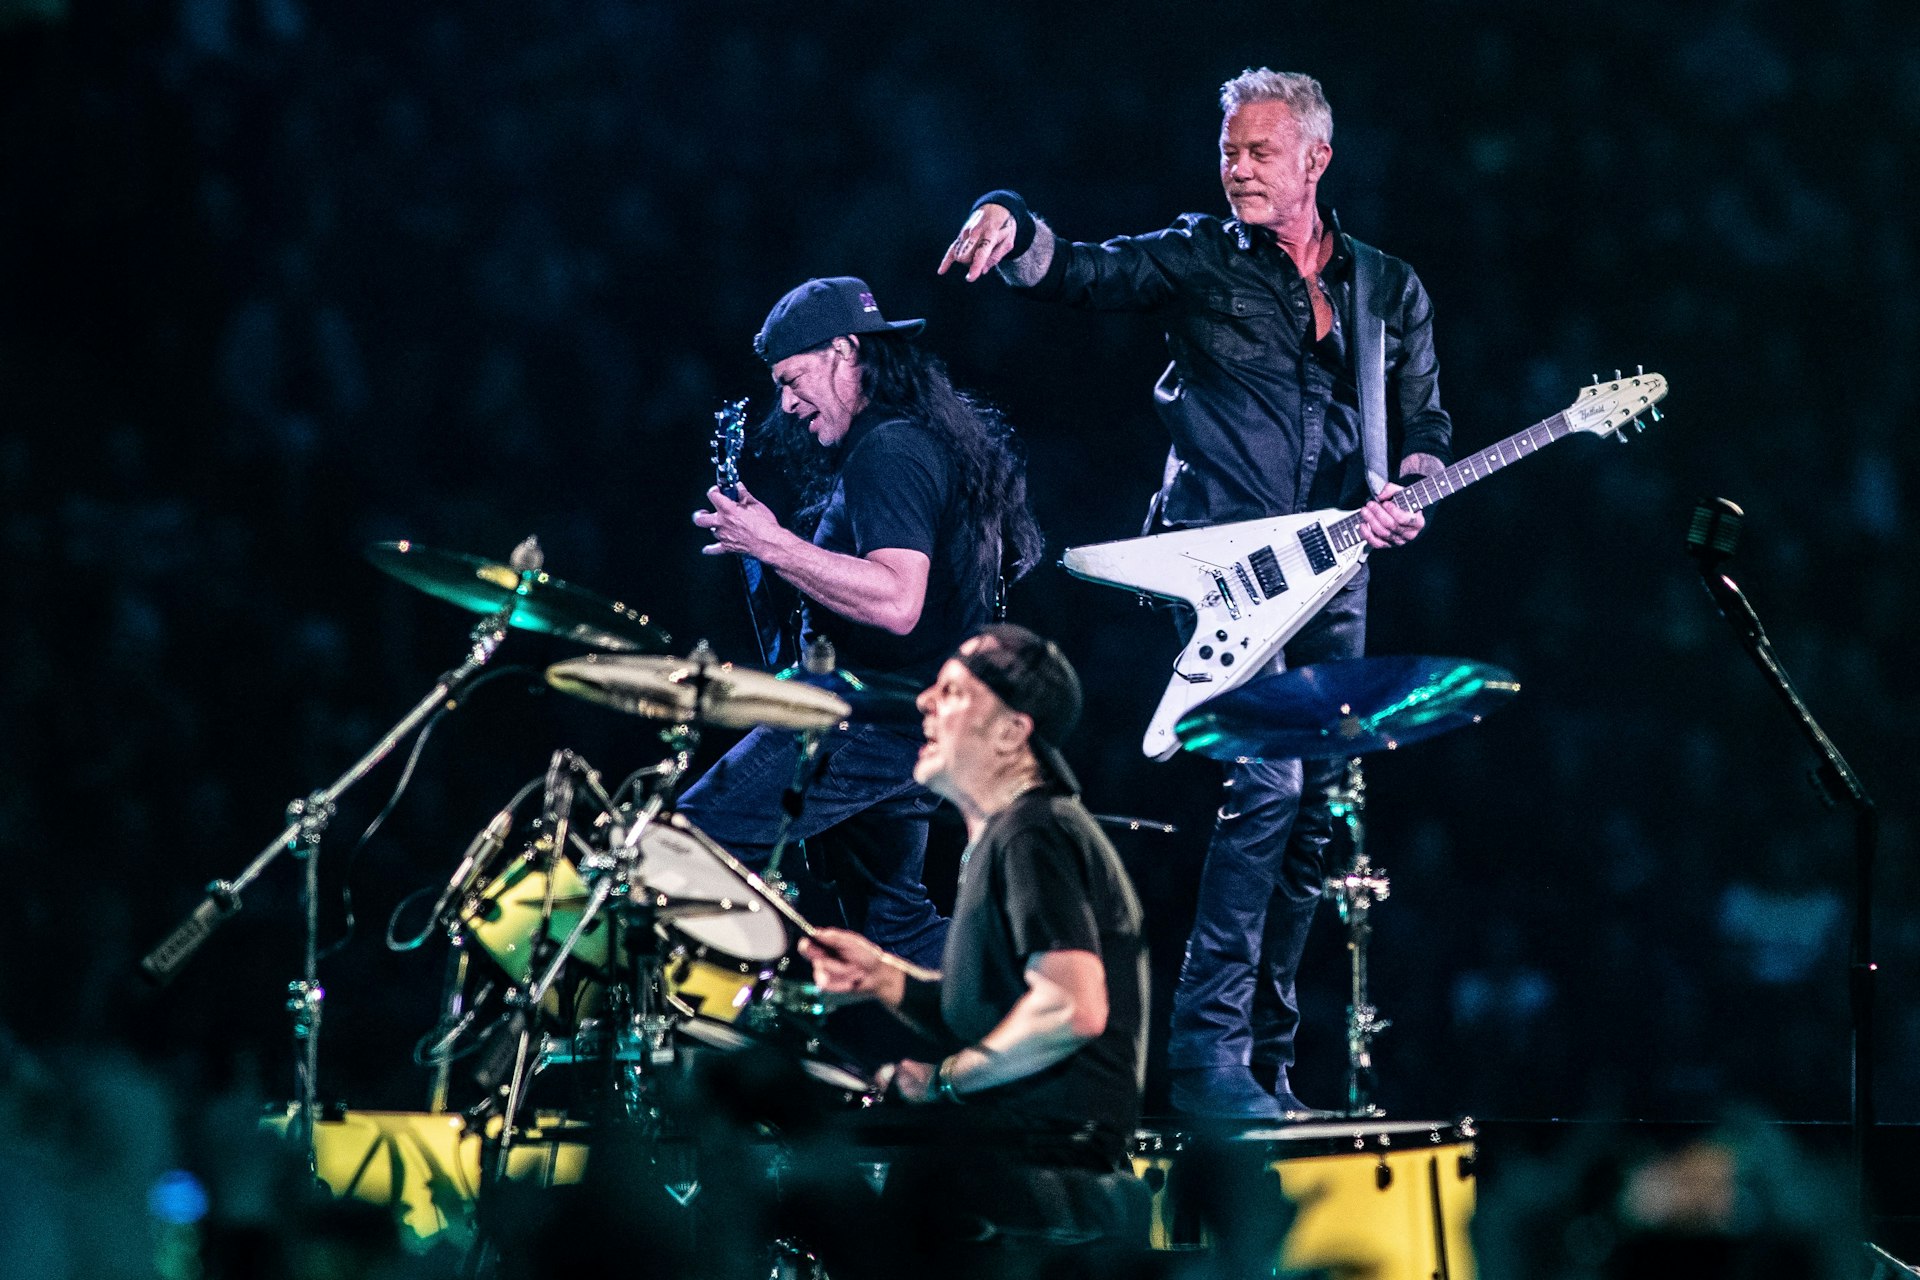 Metallica with bassist Robert Trujillo (L), singer and guitarist James Hetfield and drummer Lars Ulrich, performing on stage in Amsterdam, the Netherlands